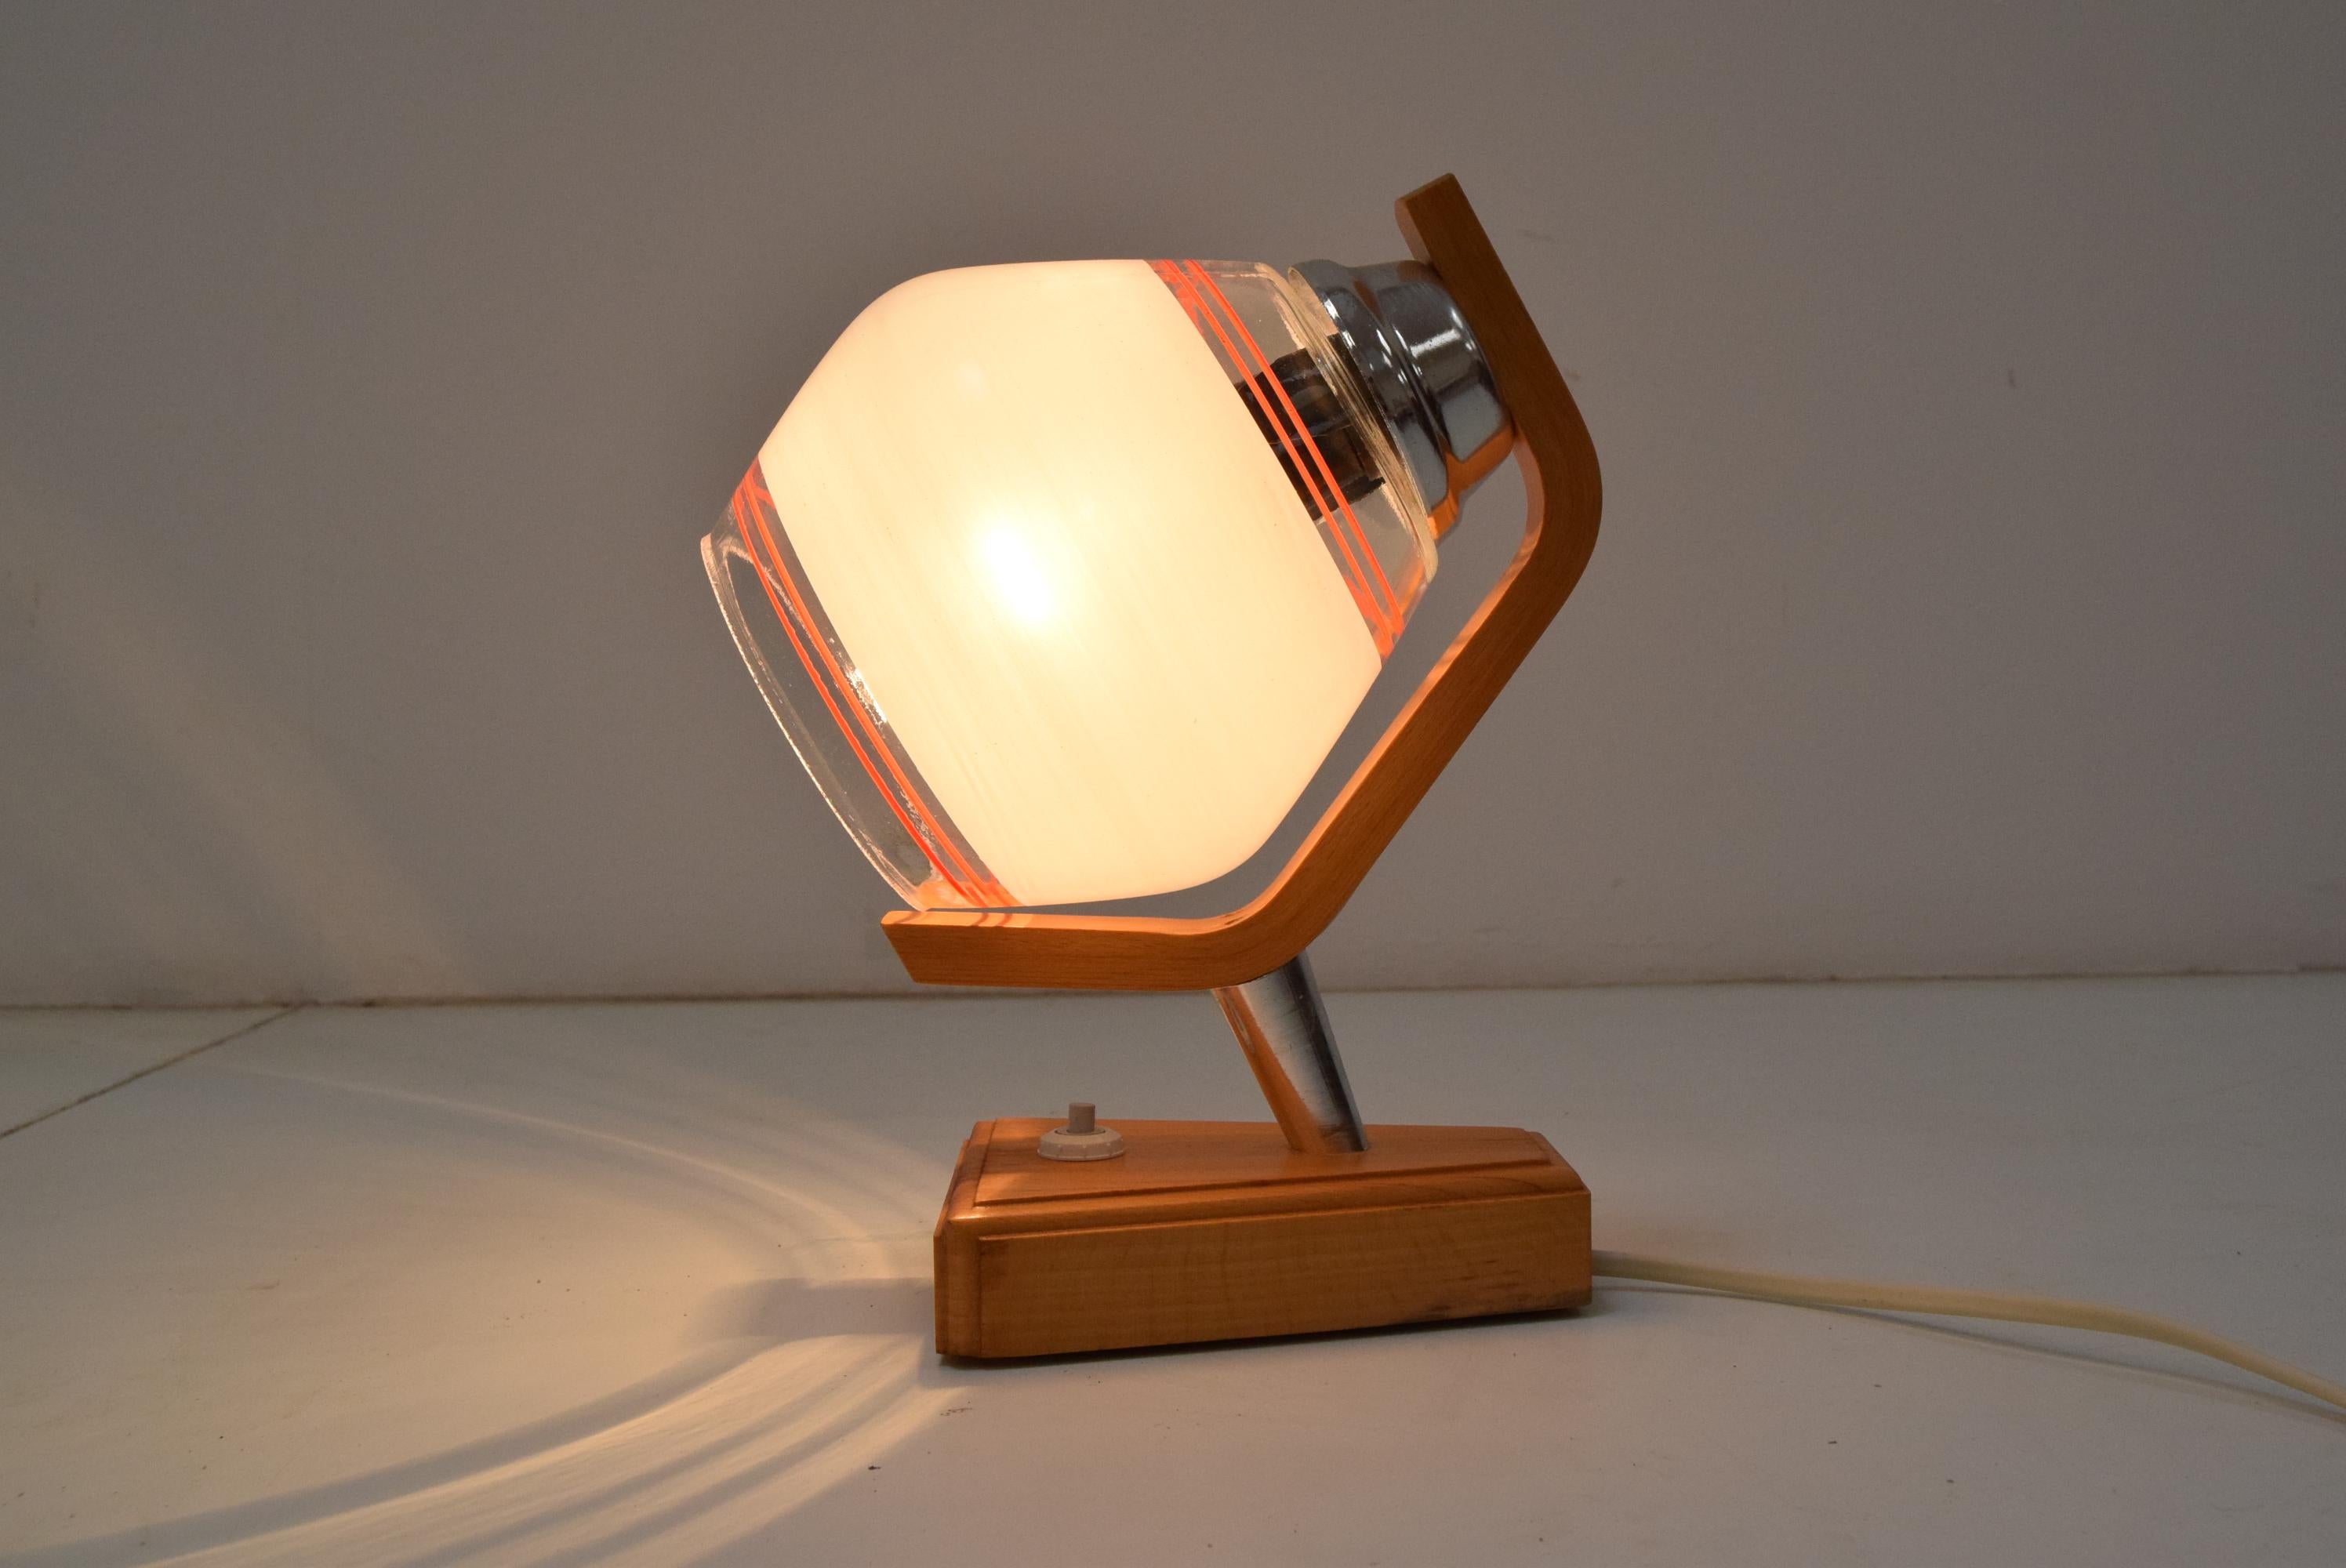 Glass Mid-Century Wood Table Lamp by Drevo Humpolec, 1970‘s